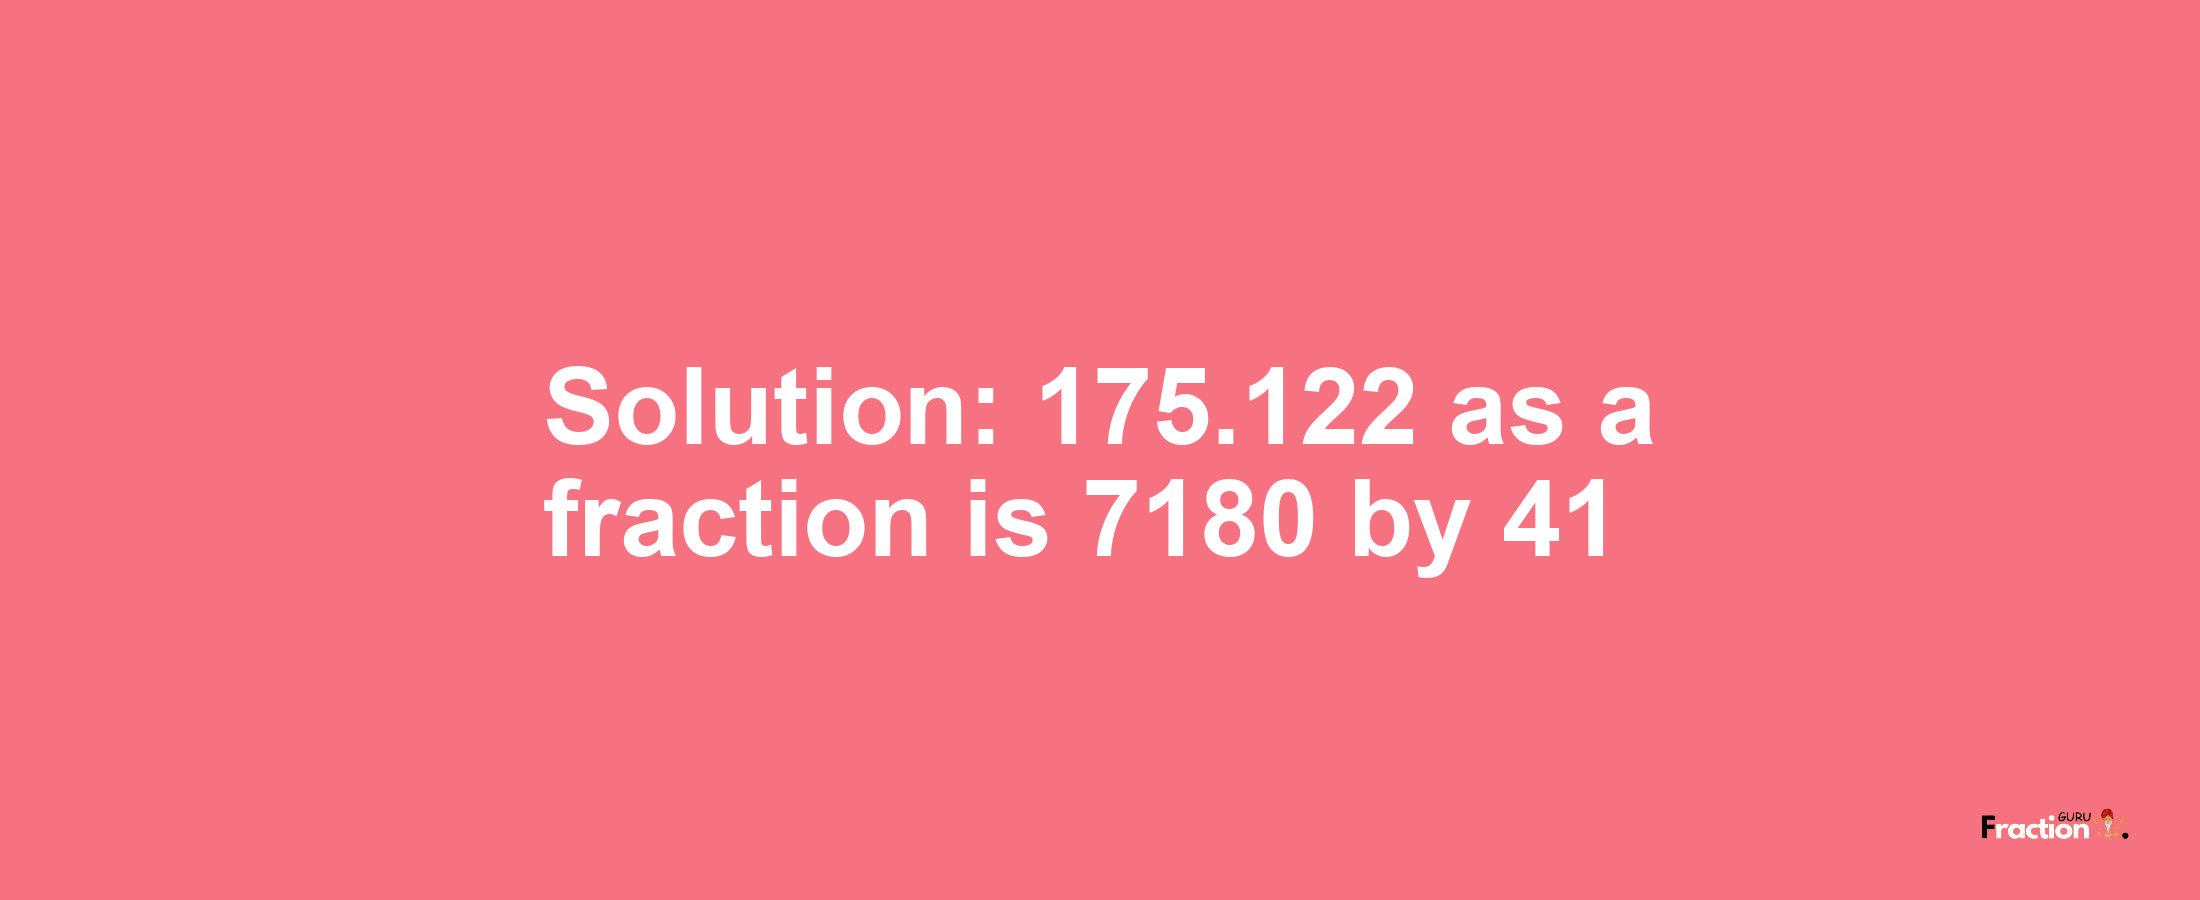 Solution:175.122 as a fraction is 7180/41